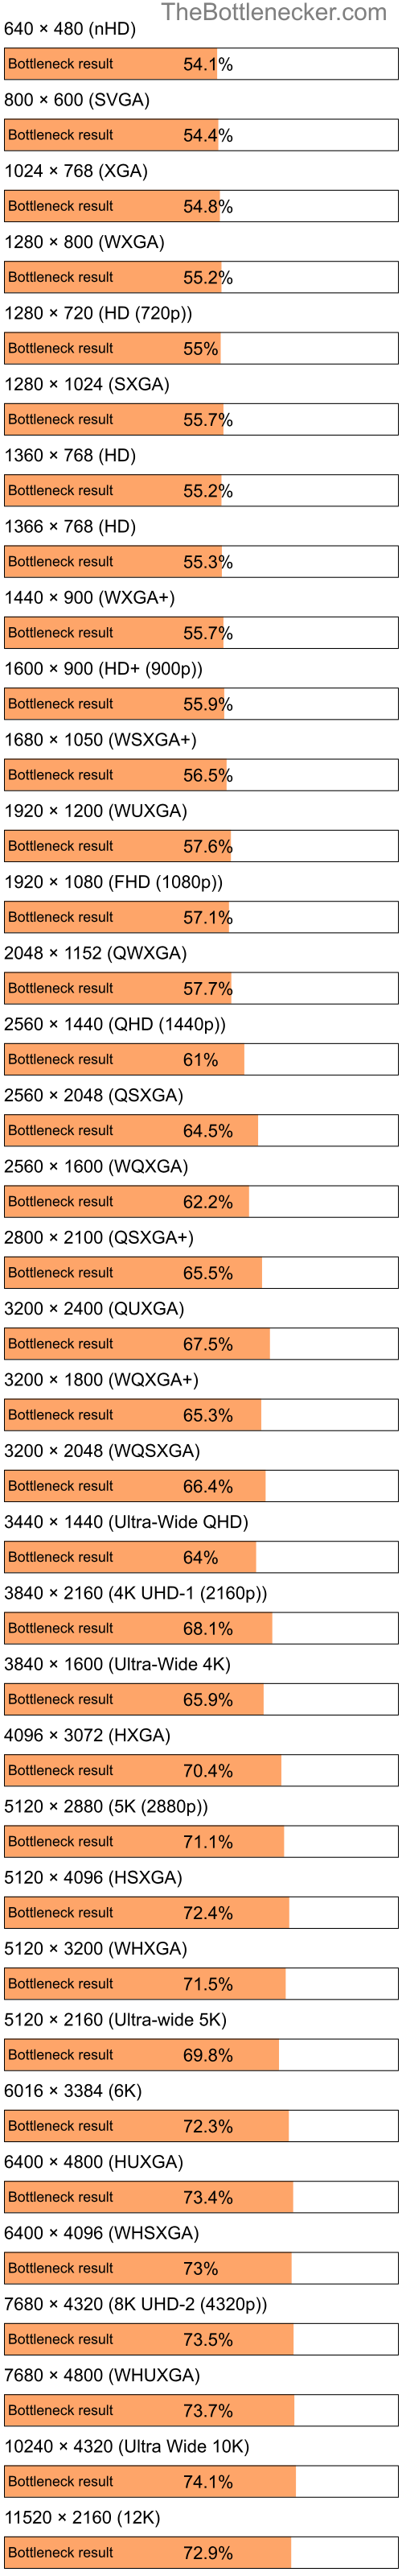 Bottleneck results by resolution for Intel Pentium 4 and NVIDIA GeForce 8100 in Processor Intense Tasks